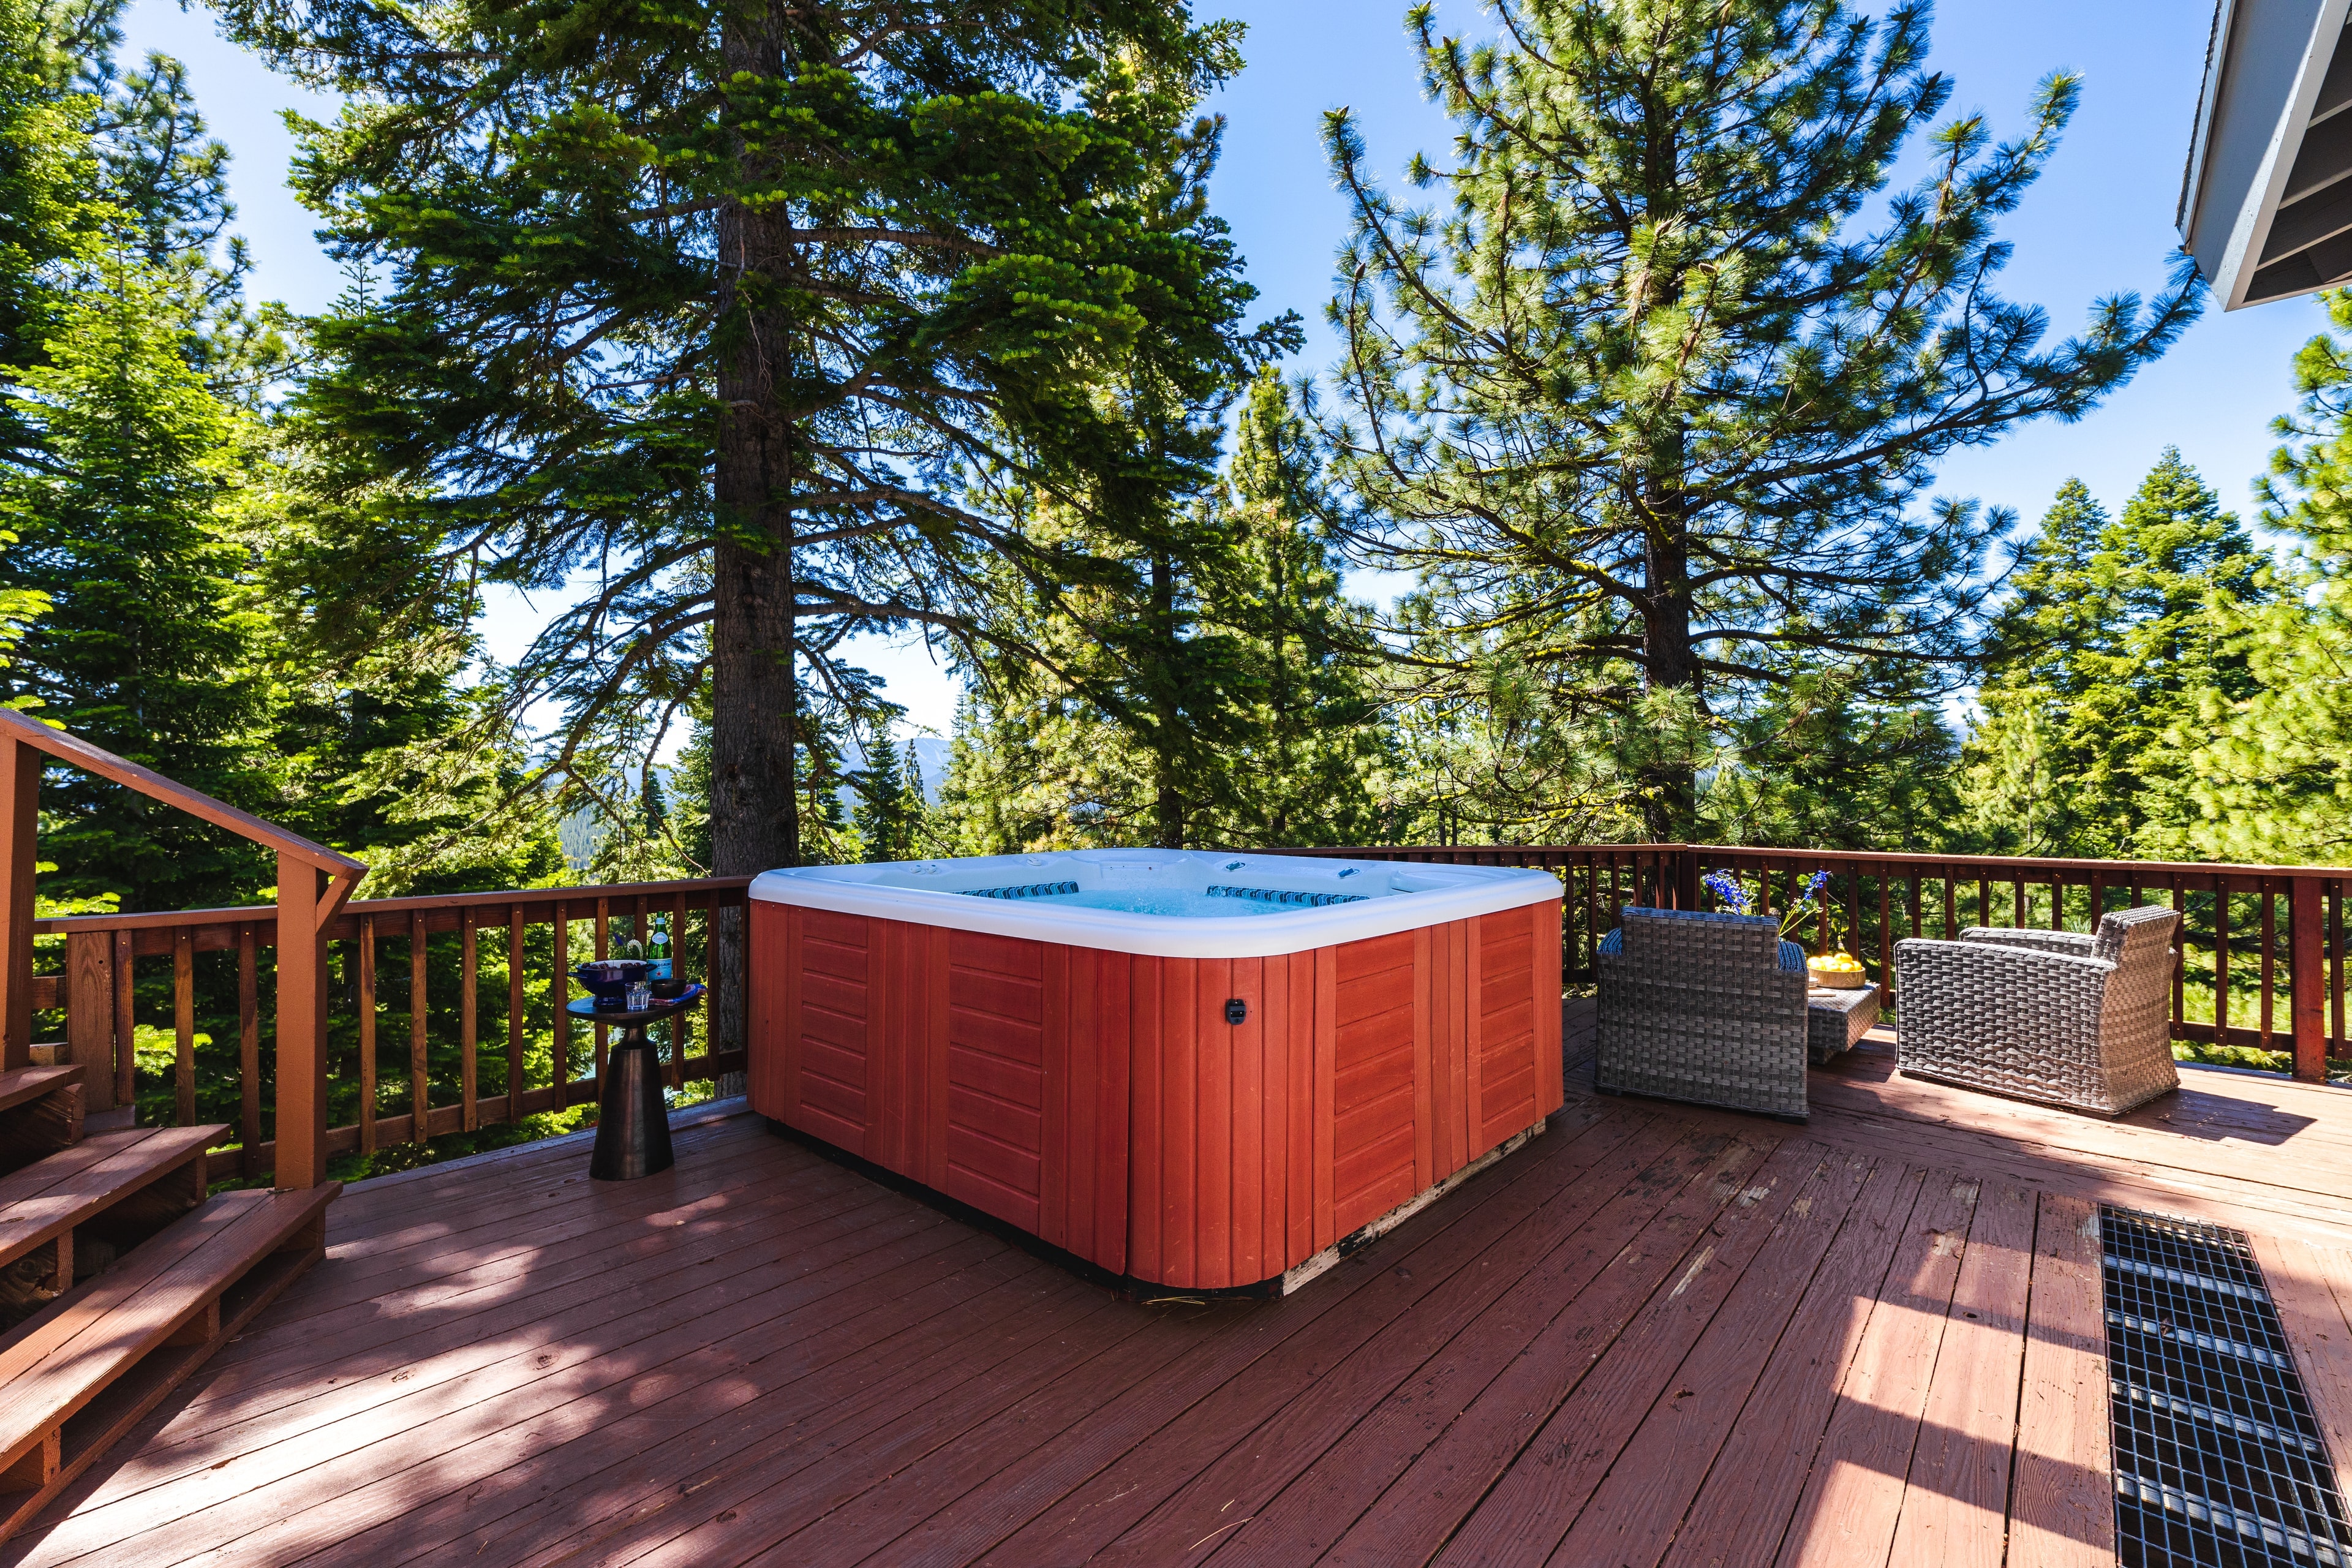 Take a dip in the hot tub surrounded by the trees.